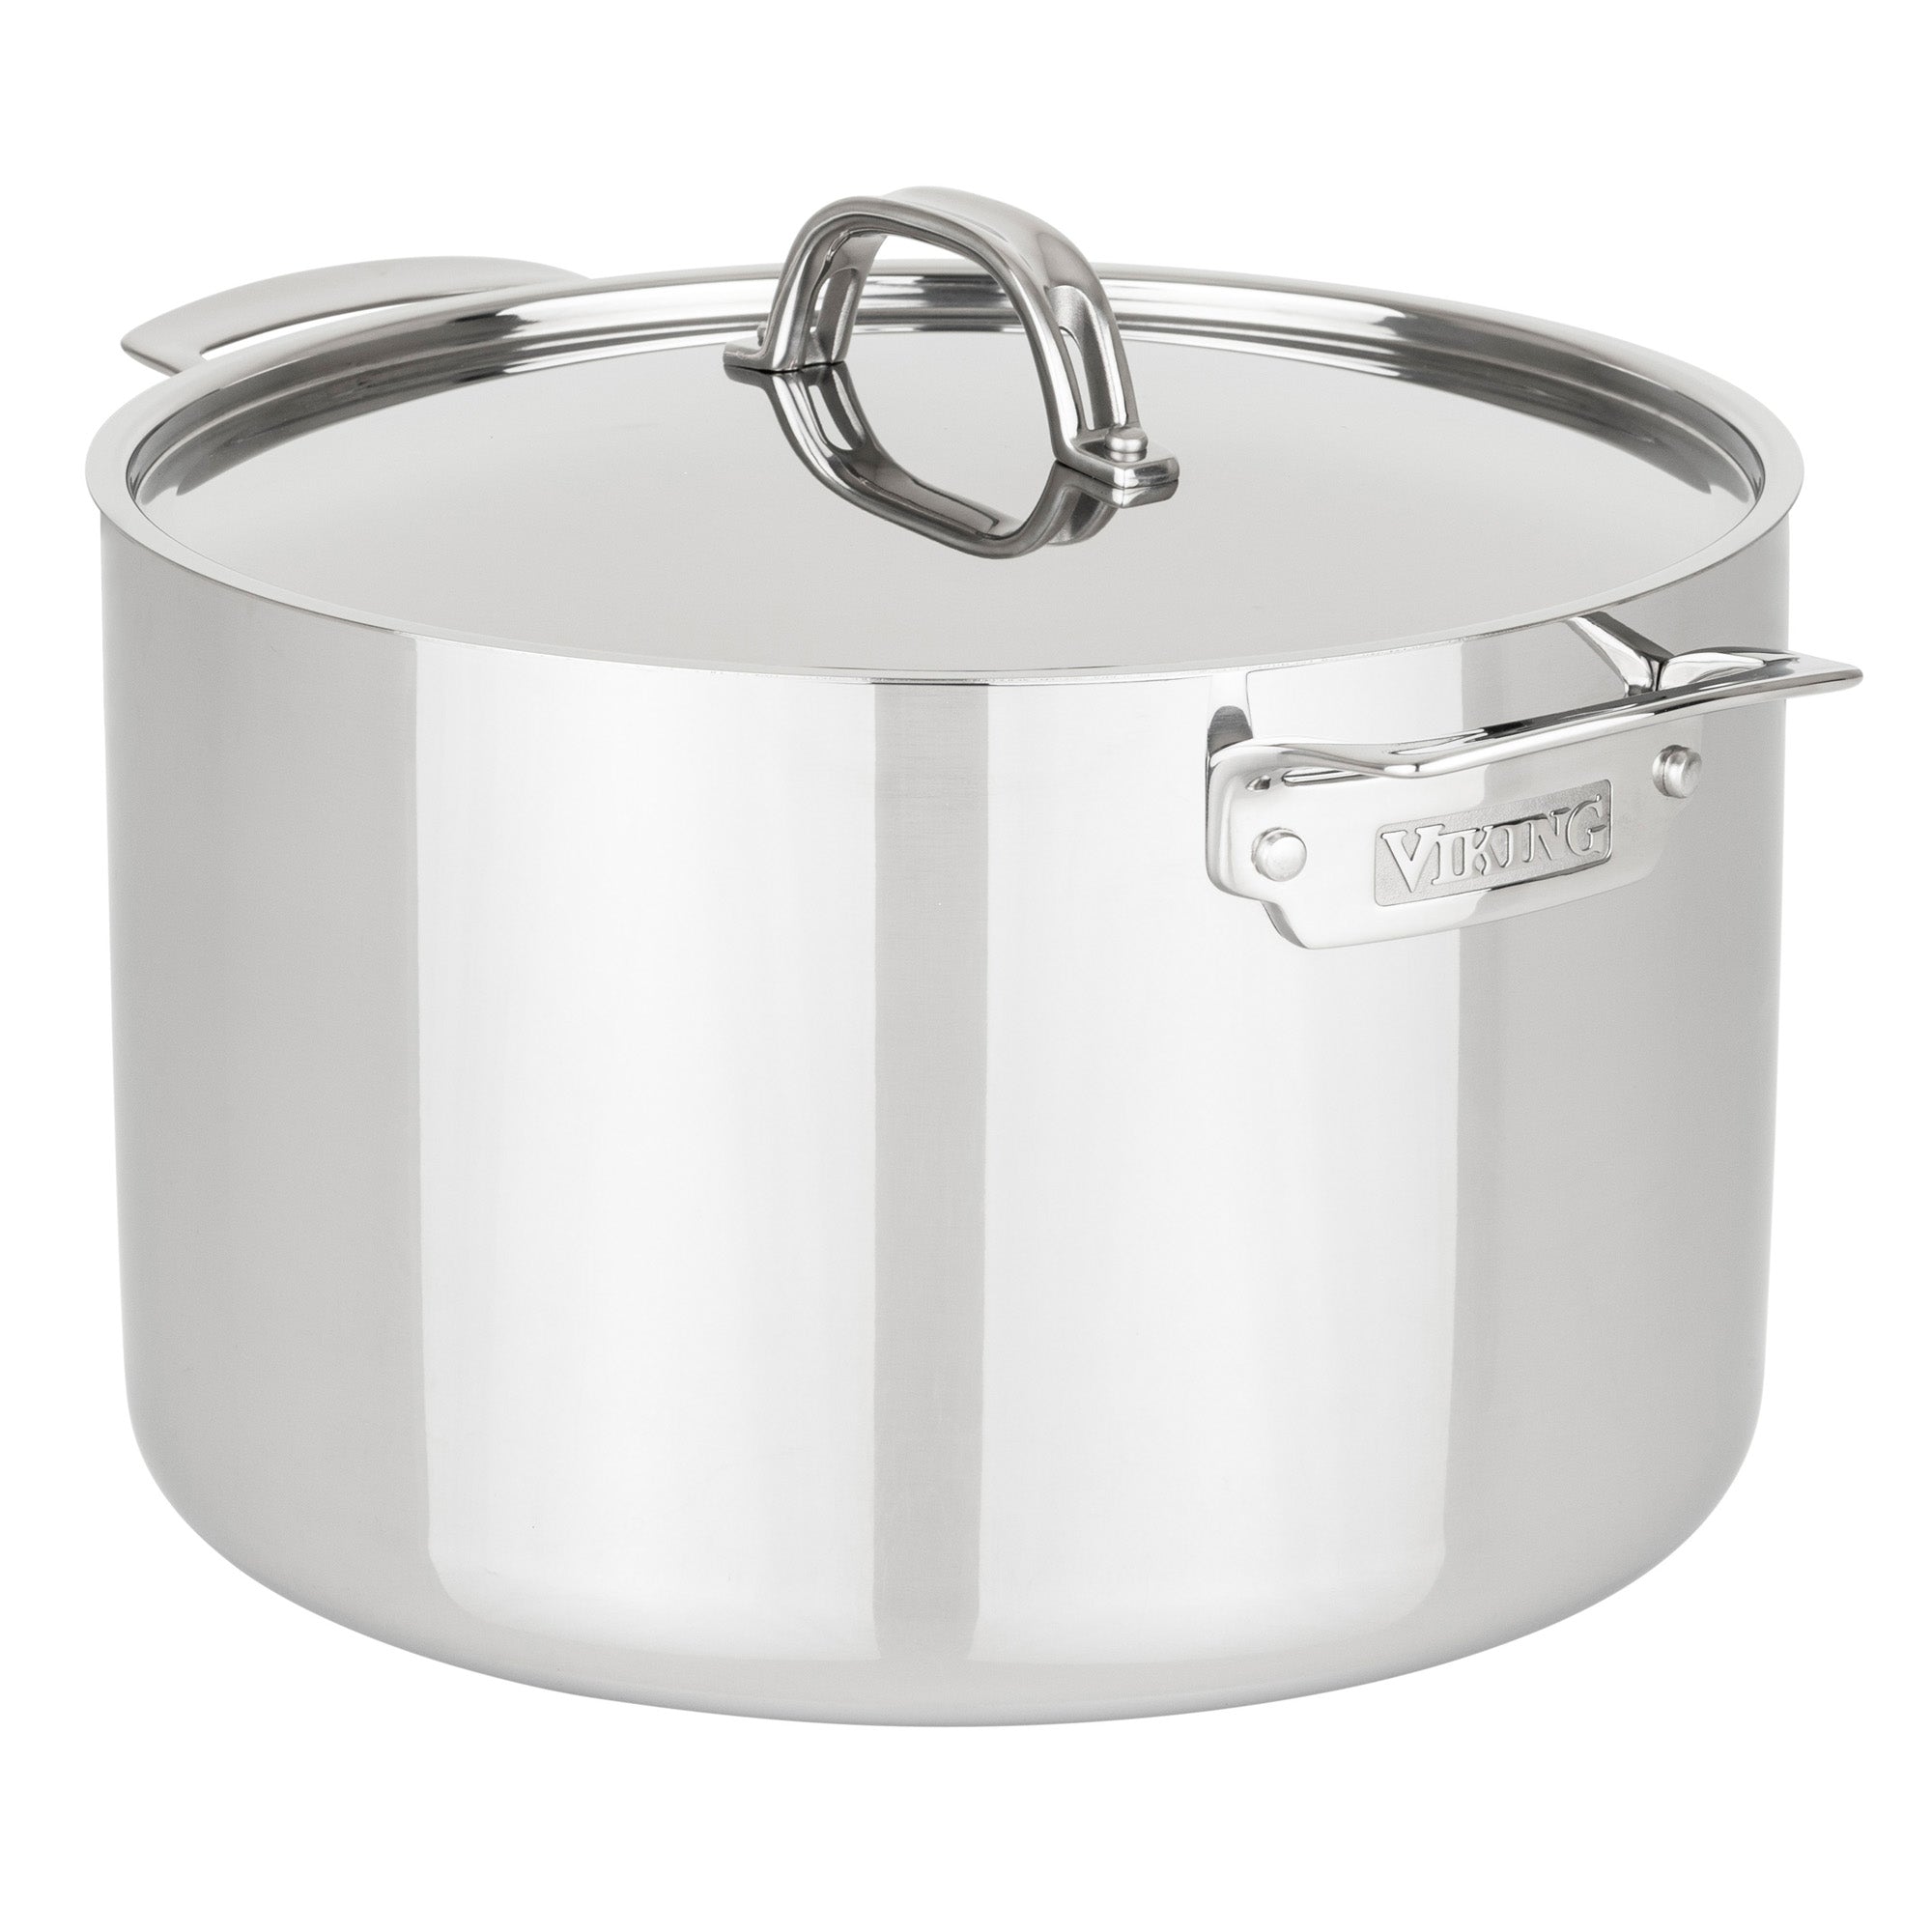 Cuisinart Chef's Classic Enameled Steel 12 Qt Stockpot with Lid - Fante's  Kitchen Shop - Since 1906